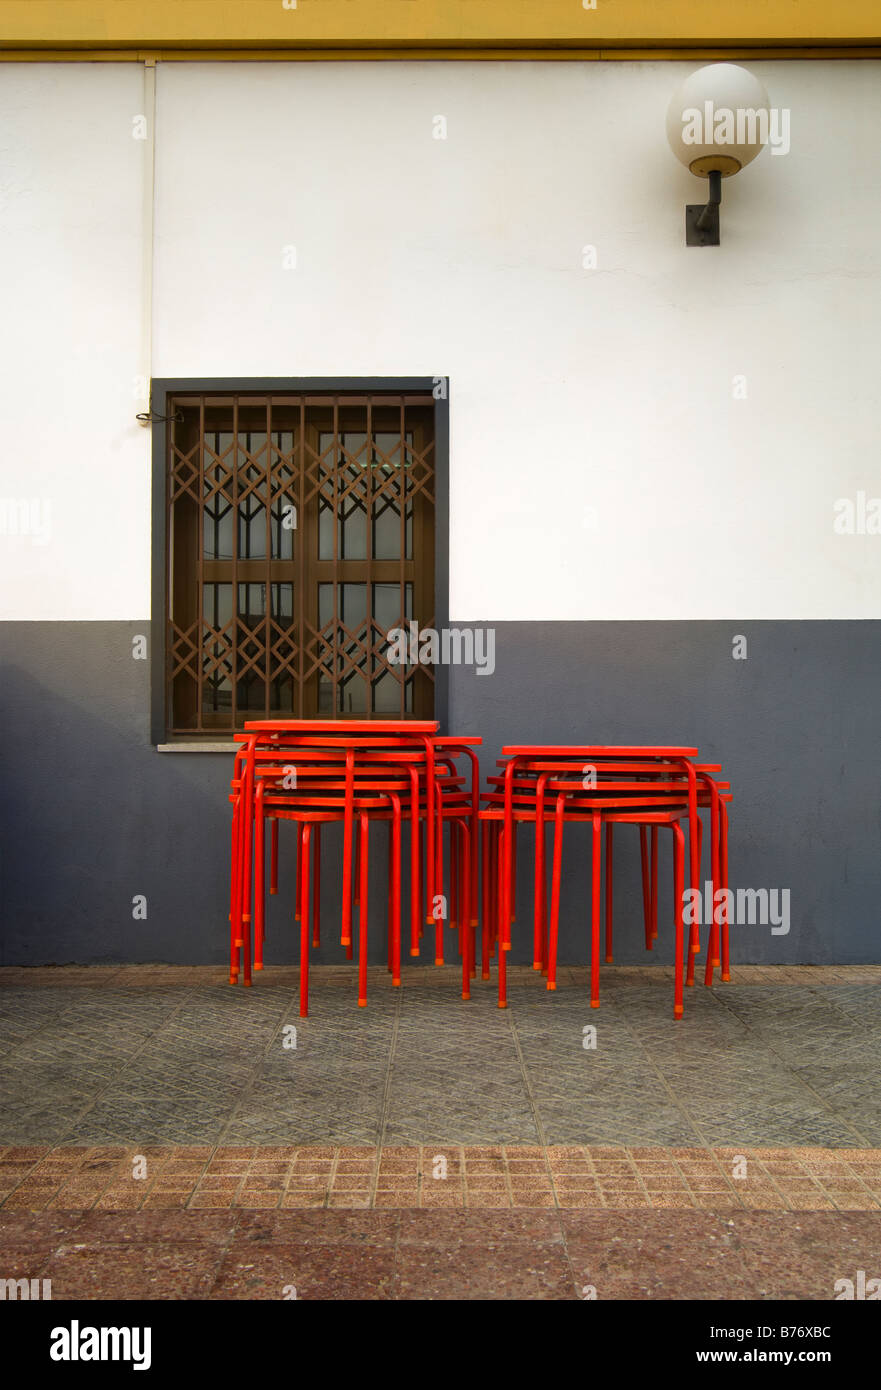 Cafe at railway station in Chiclana de la Frontera Andalusia Spain showing stack of red tables outside shuttered window Stock Photo